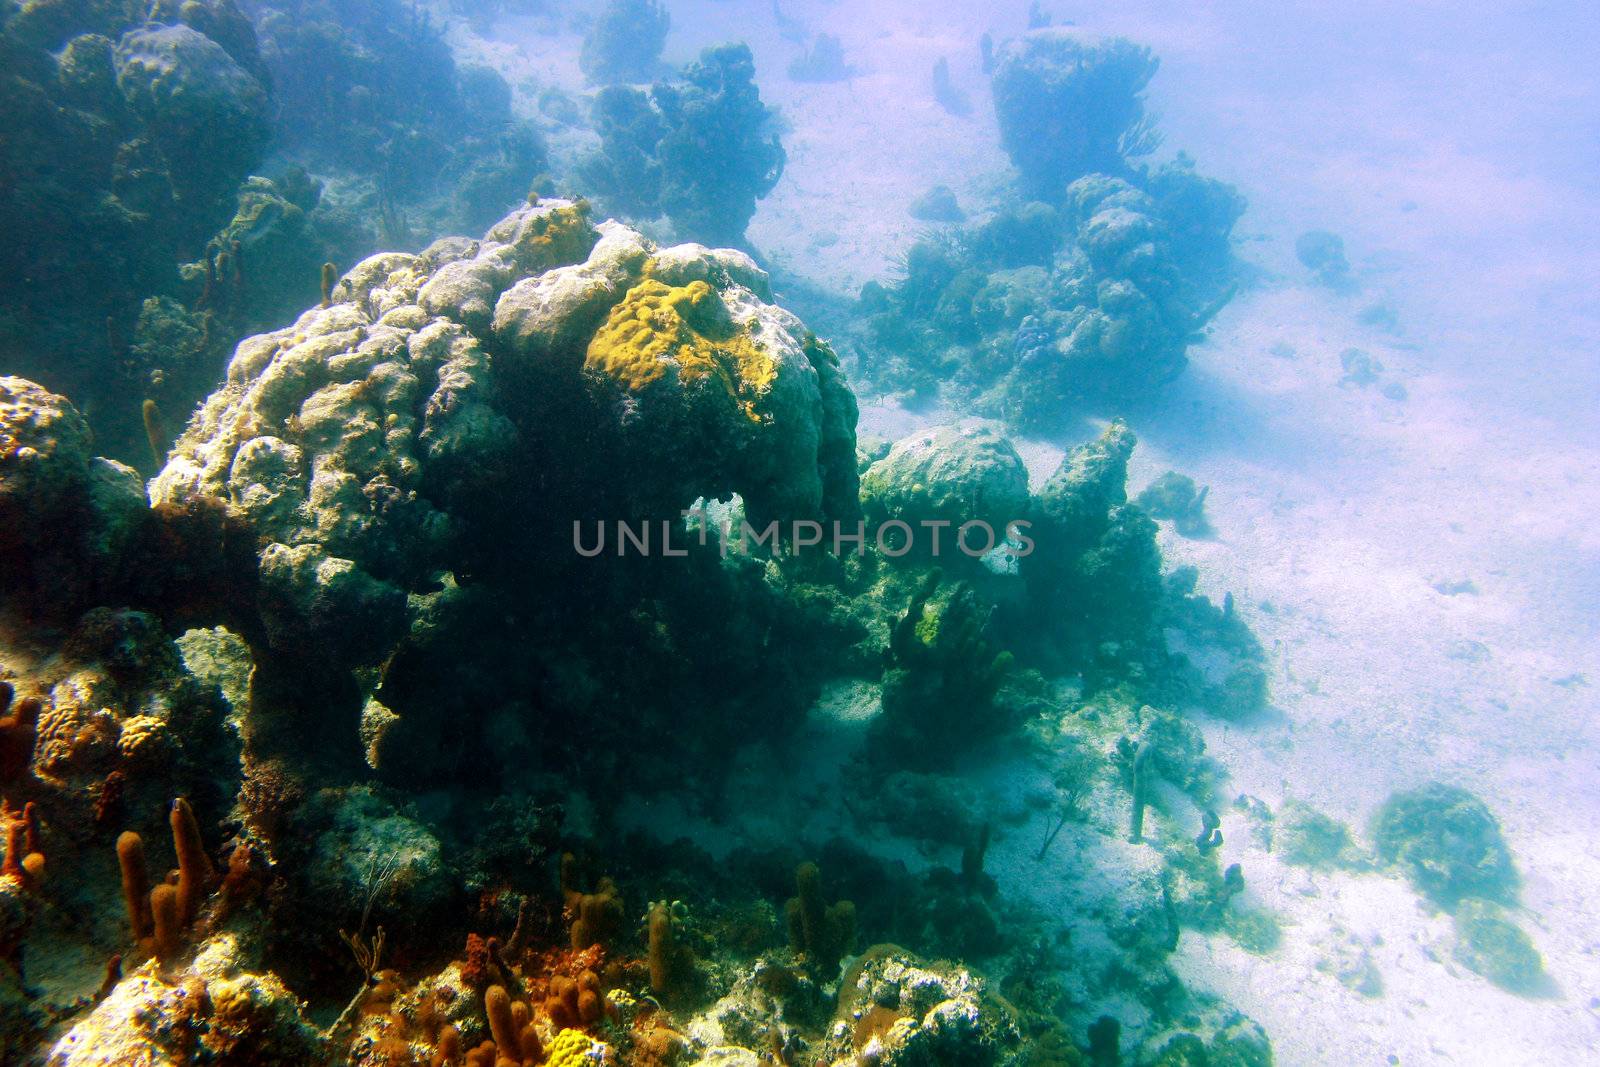 Image of a colorful underwater scene with rocks and coral.                               